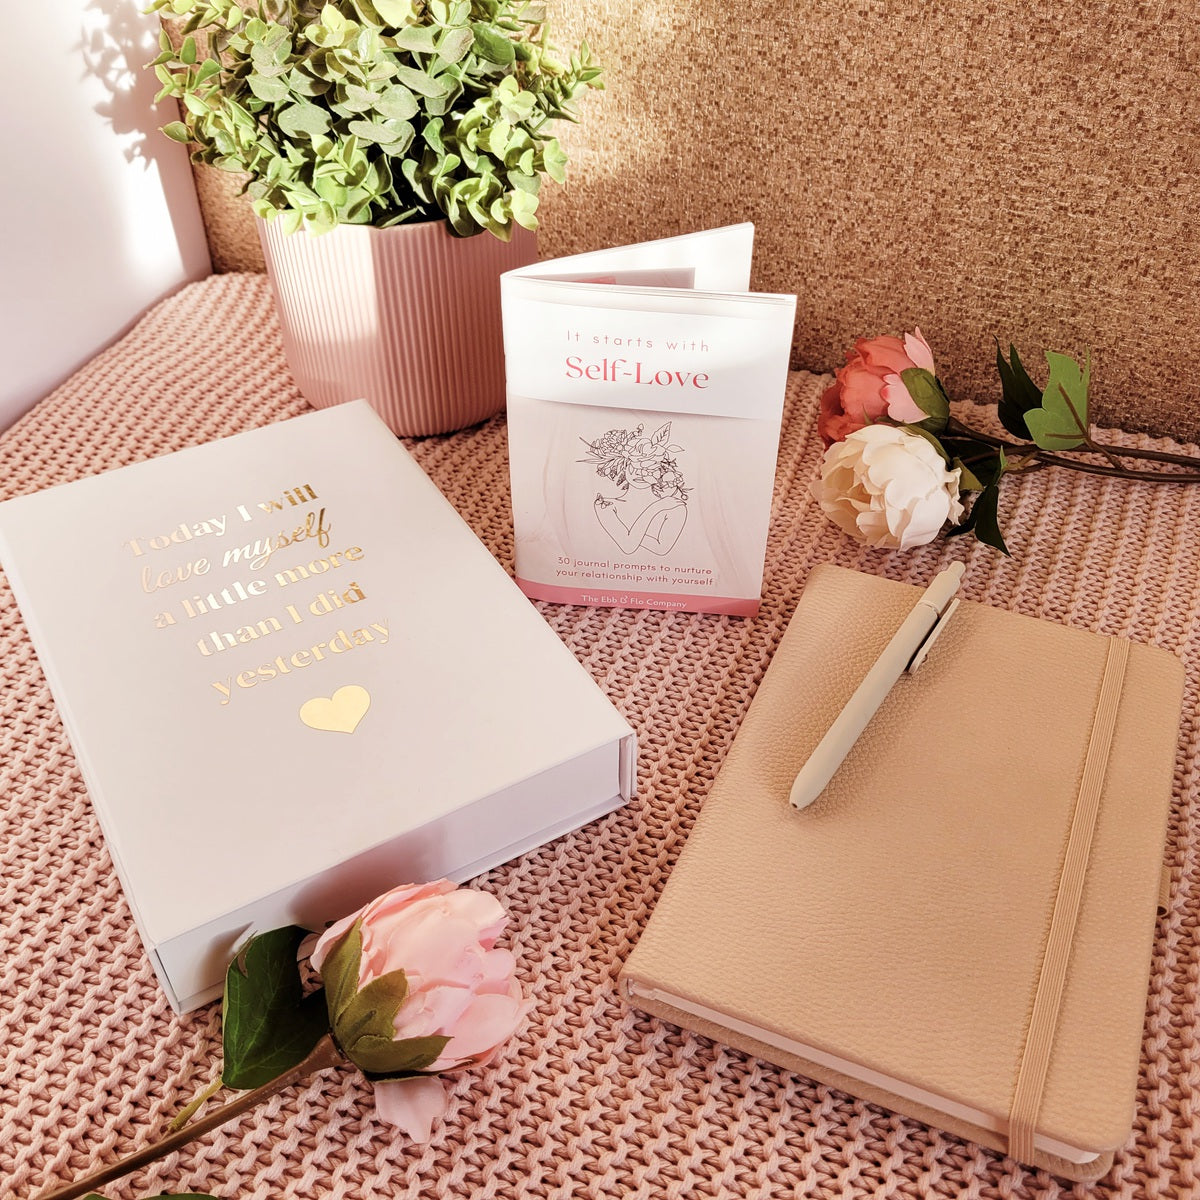 Self-Love_Gift_Set - book box with affirmation "Today I will love myself a little more than I did yesterday", Self-love journal prompts book, faux leather notebook, beige pen